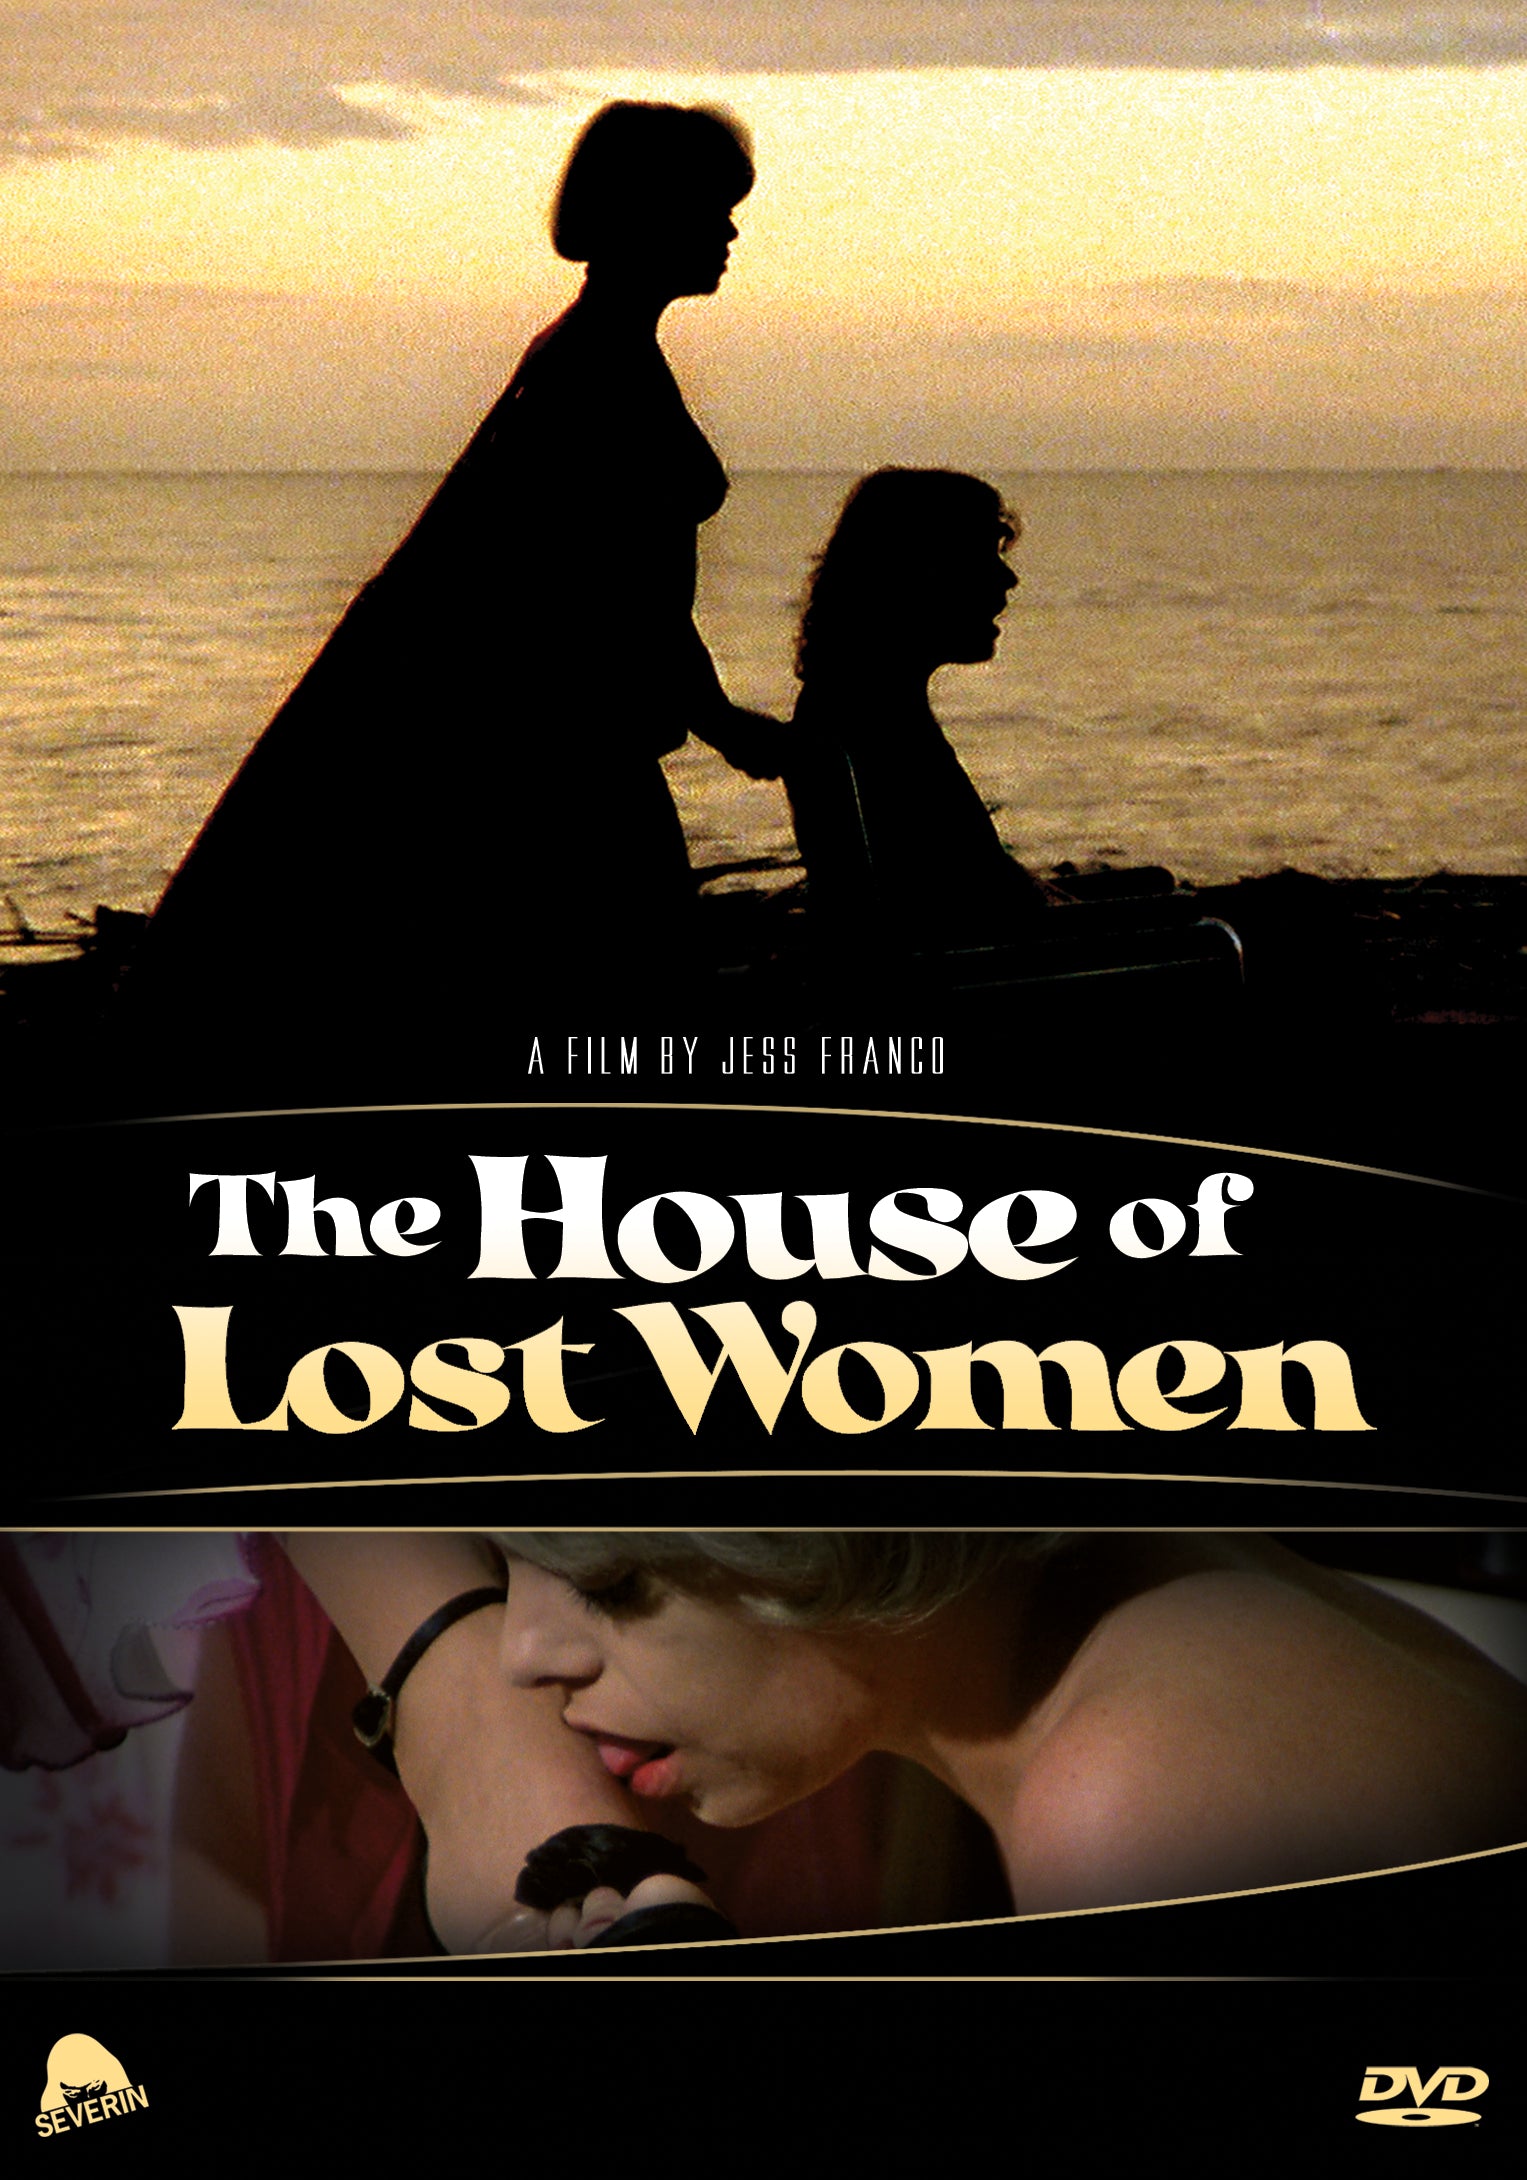 THE HOUSE OF LOST WOMEN DVD